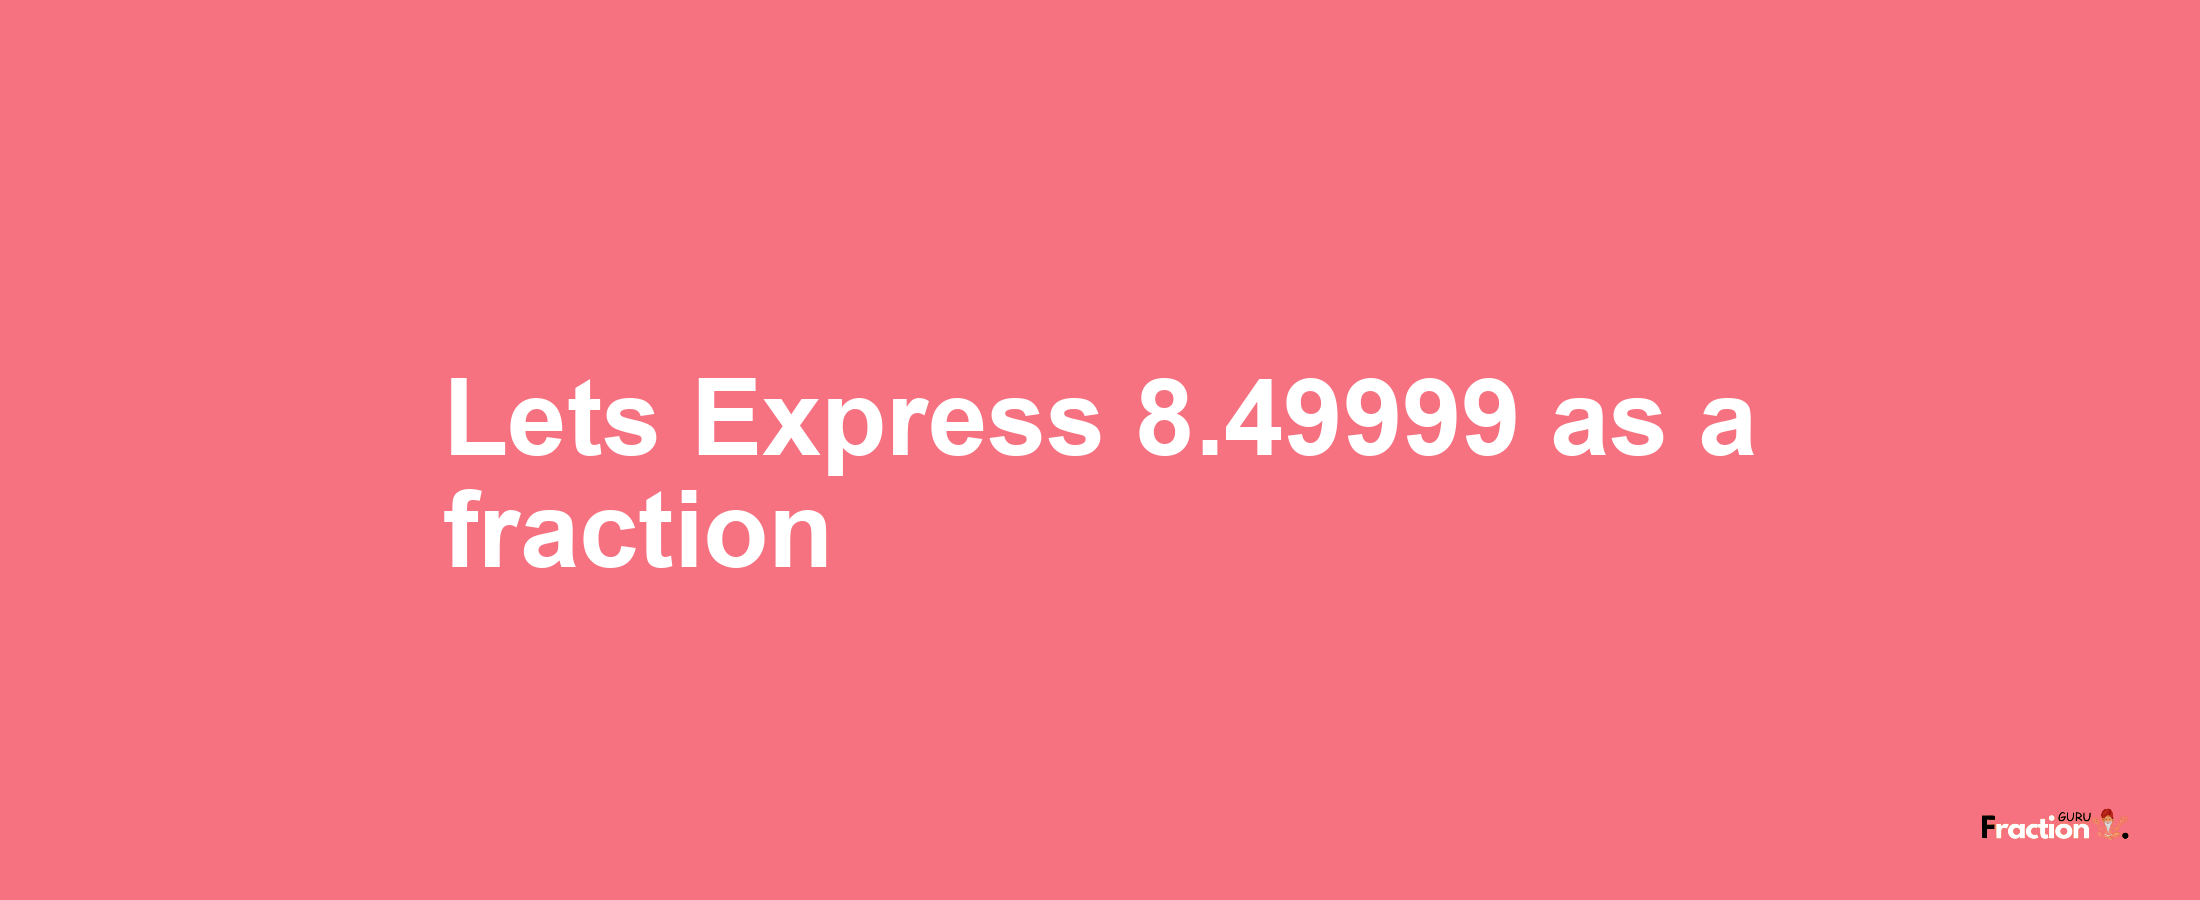 Lets Express 8.49999 as afraction